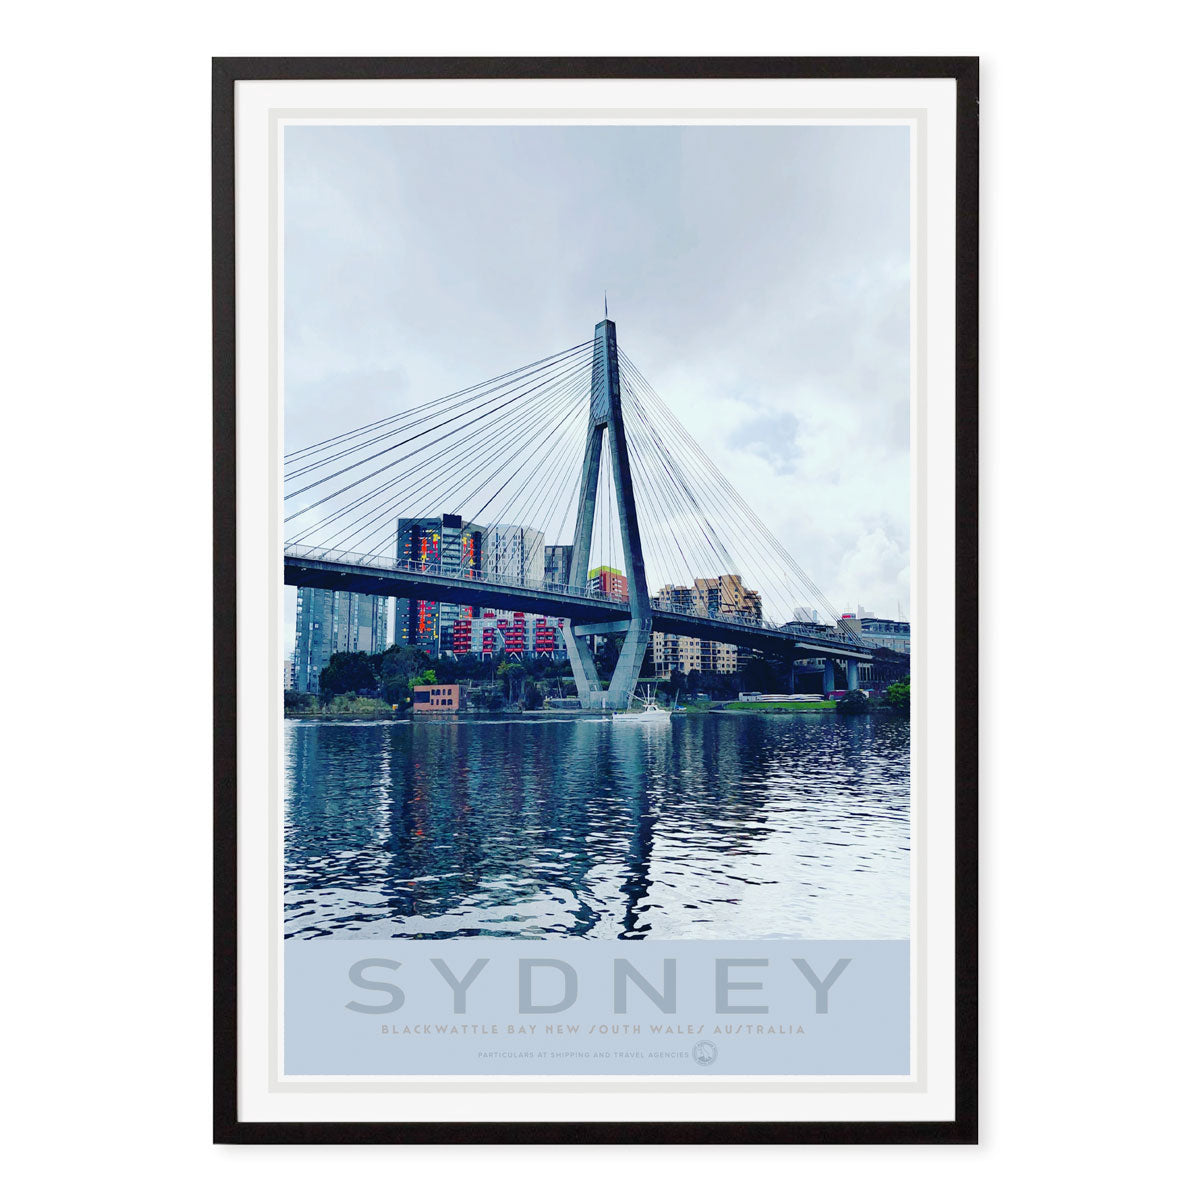 Sydney Australia vintage retro poster print in black frame from Places We Luv